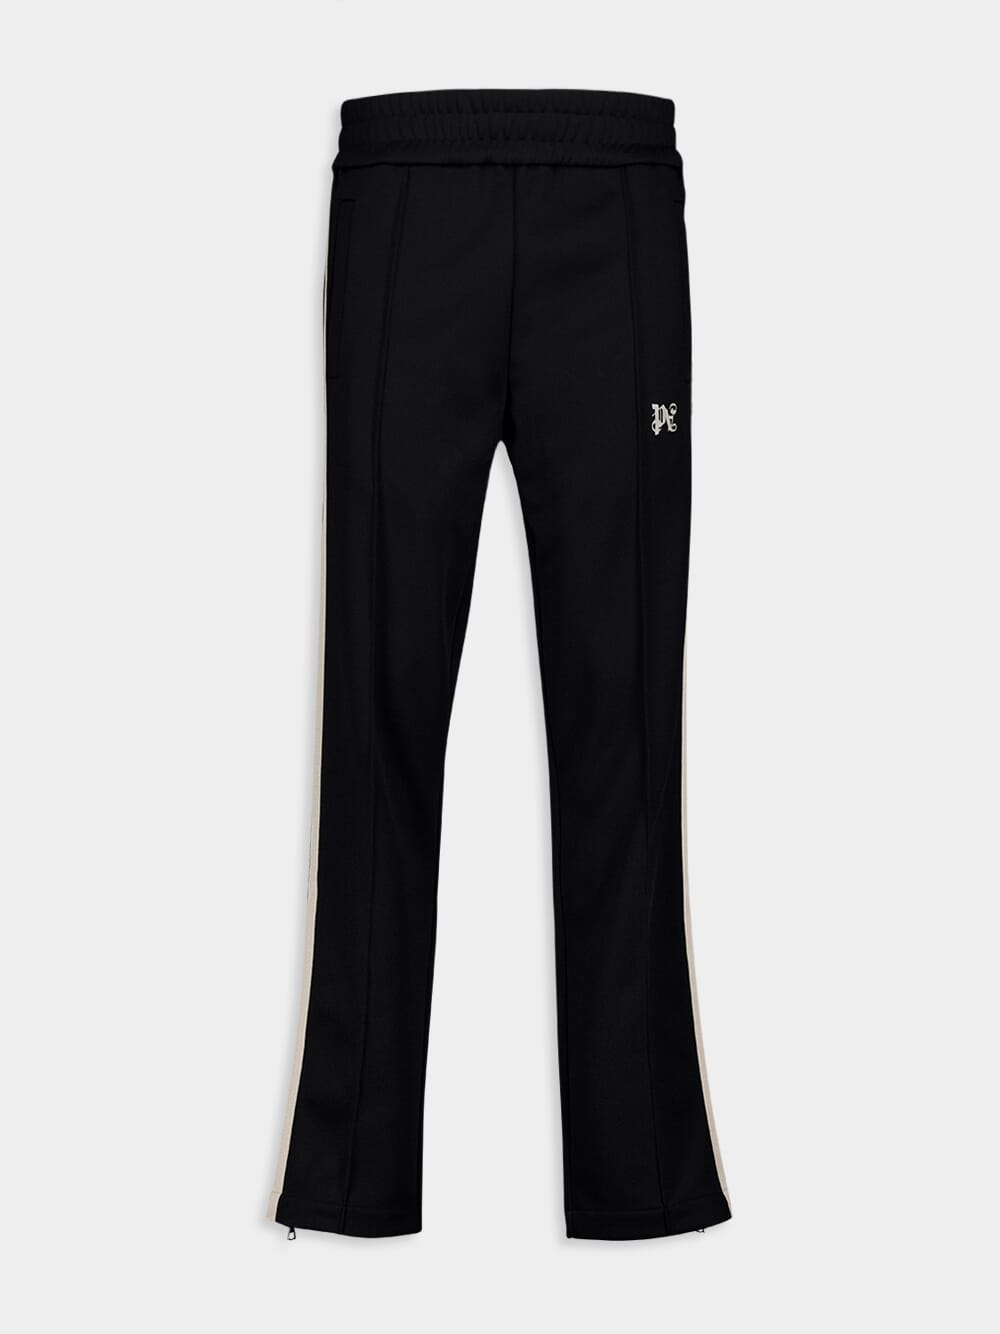 Palm AngelsMonogram Embroidered Track Pants at Fashion Clinic